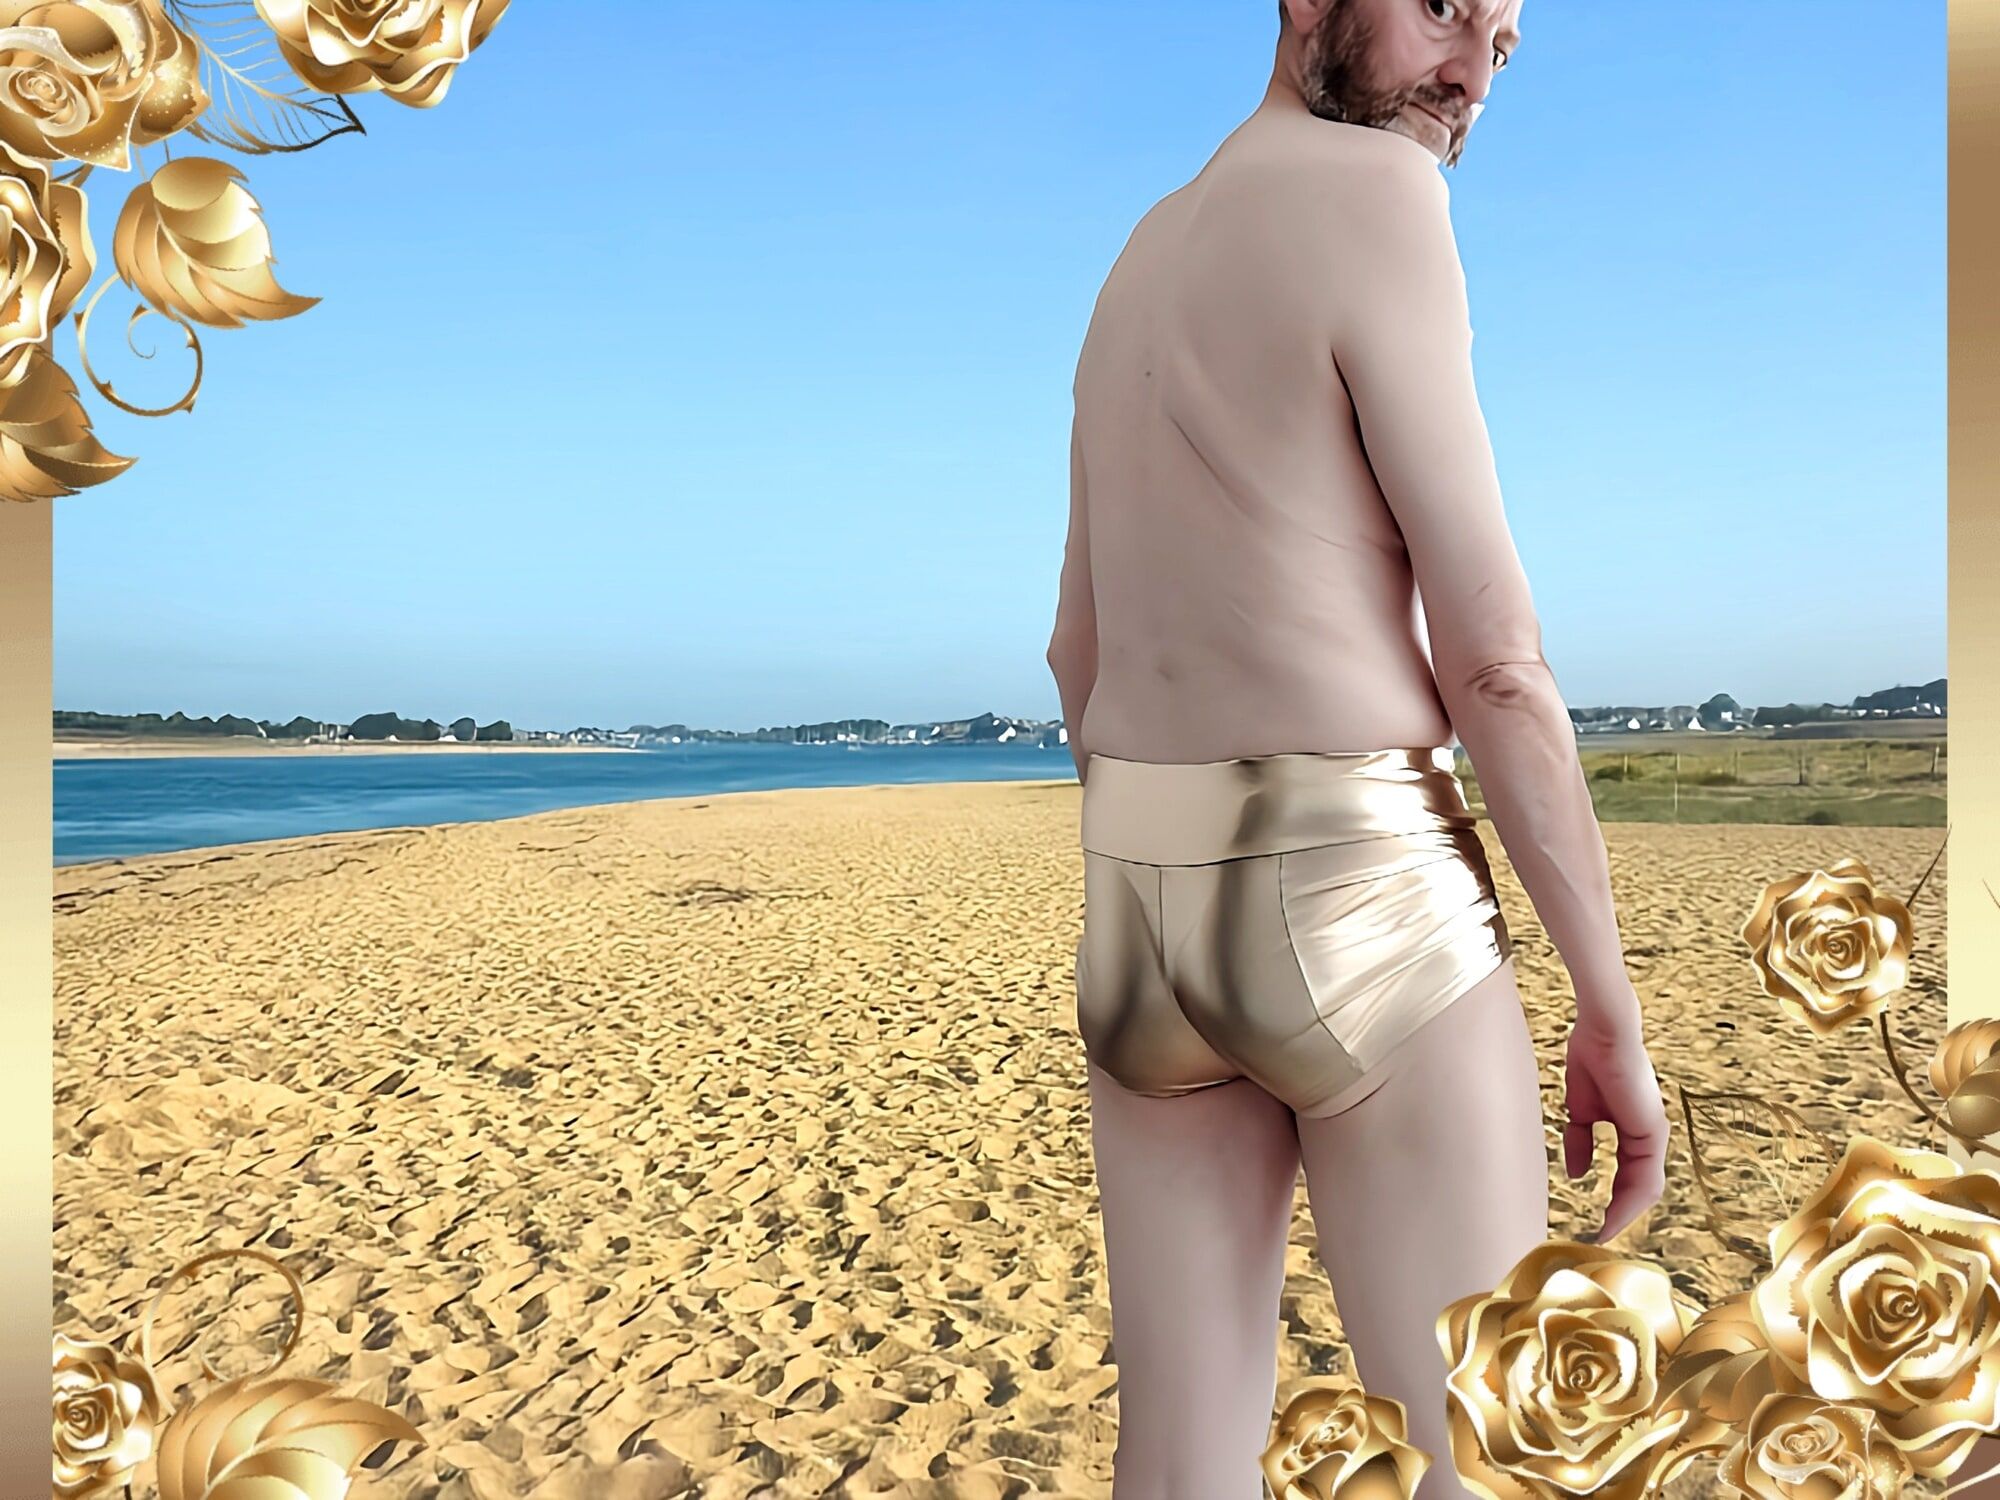 porcinus on vacation by the sea naturist beaches #2